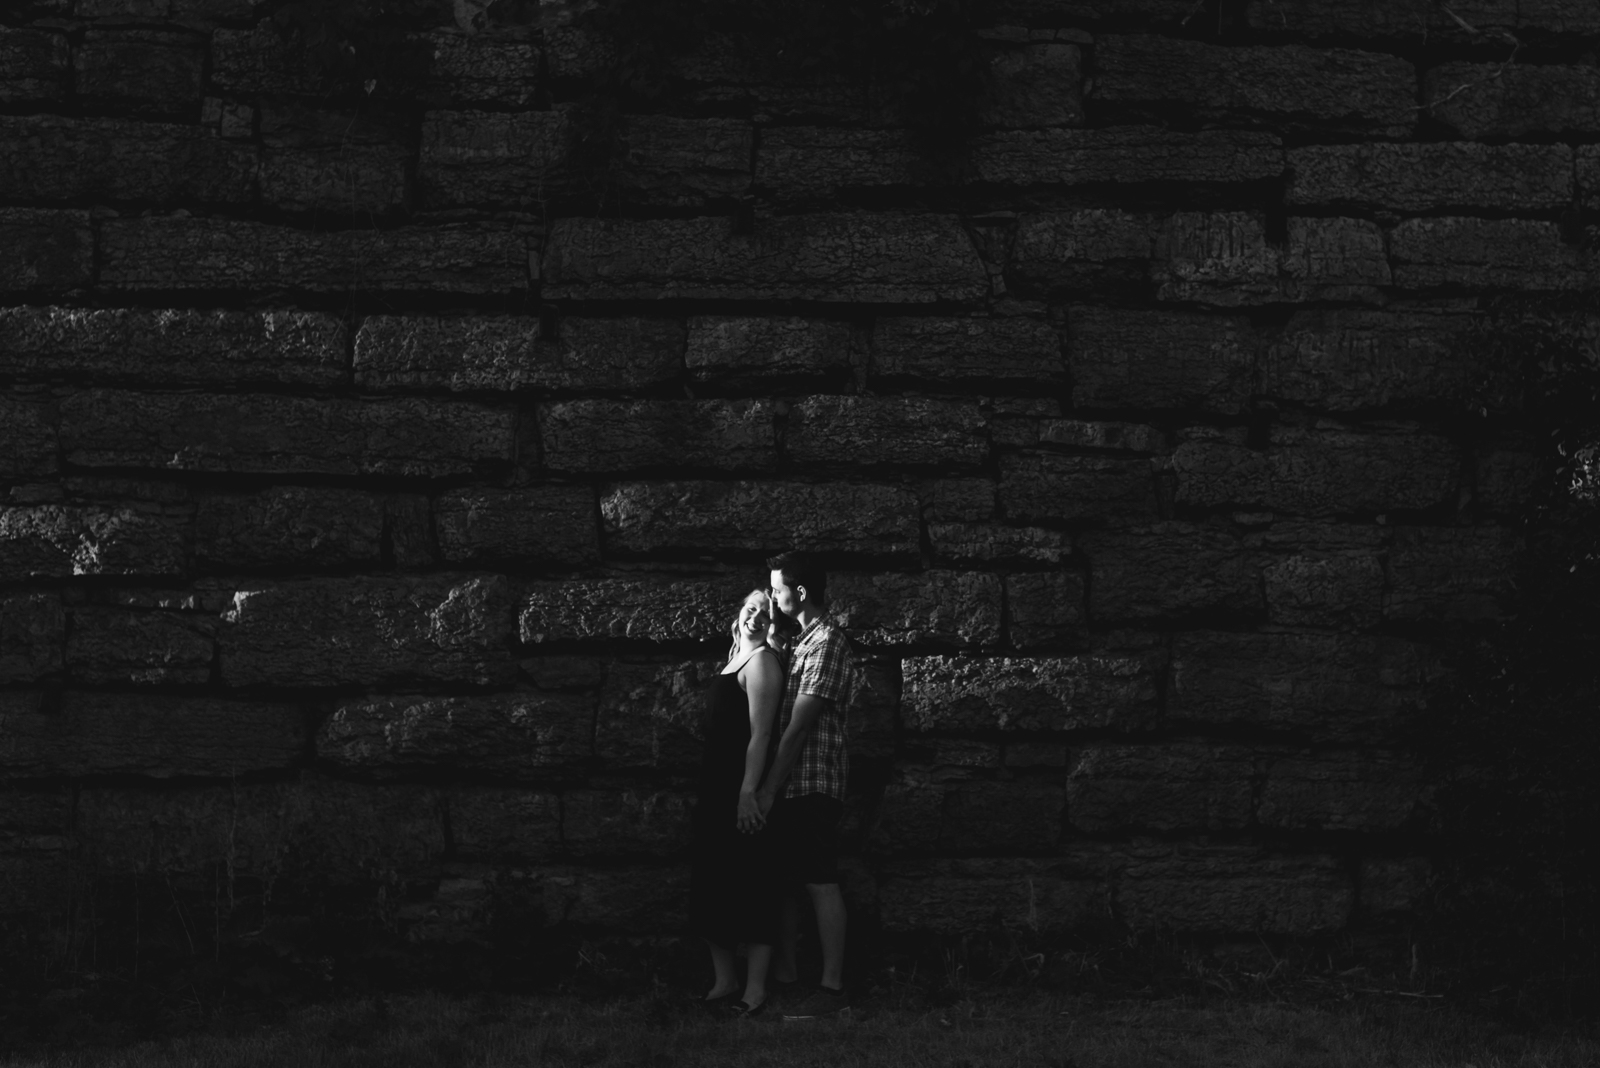 engaged couple standing in a pool of light against a brick wall